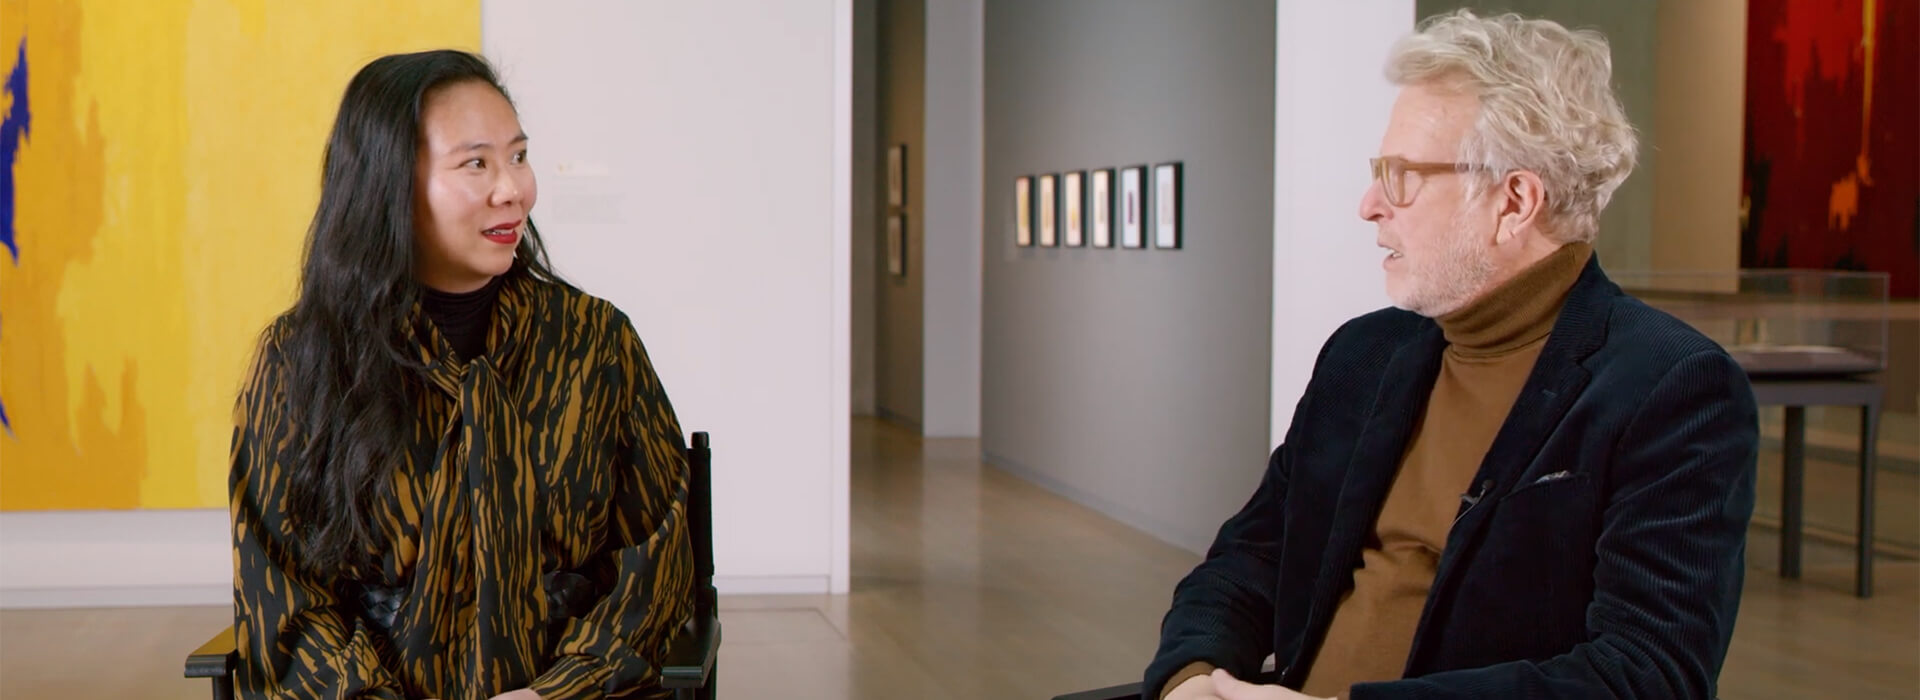 Two people sit in chairs in an art gallery and talk to each other